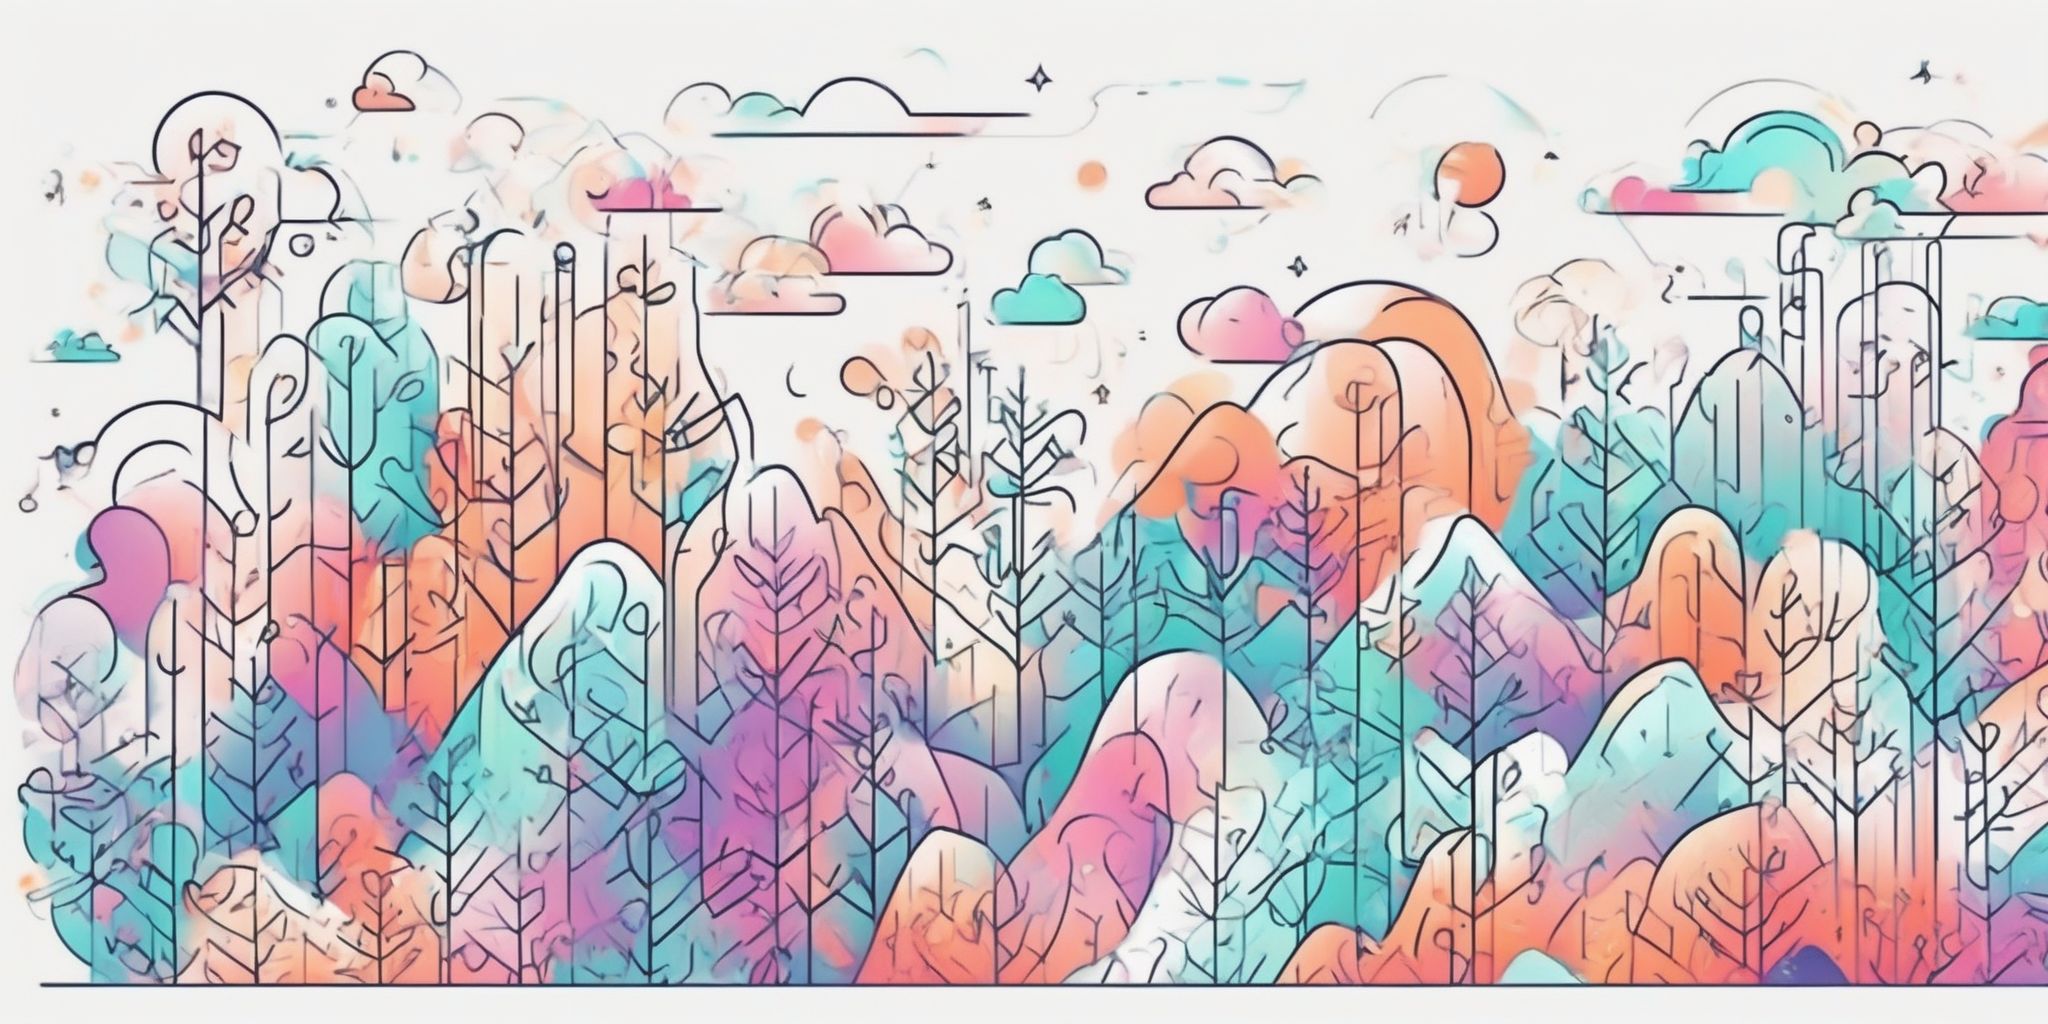 scrolling in illustration style with gradients and white background